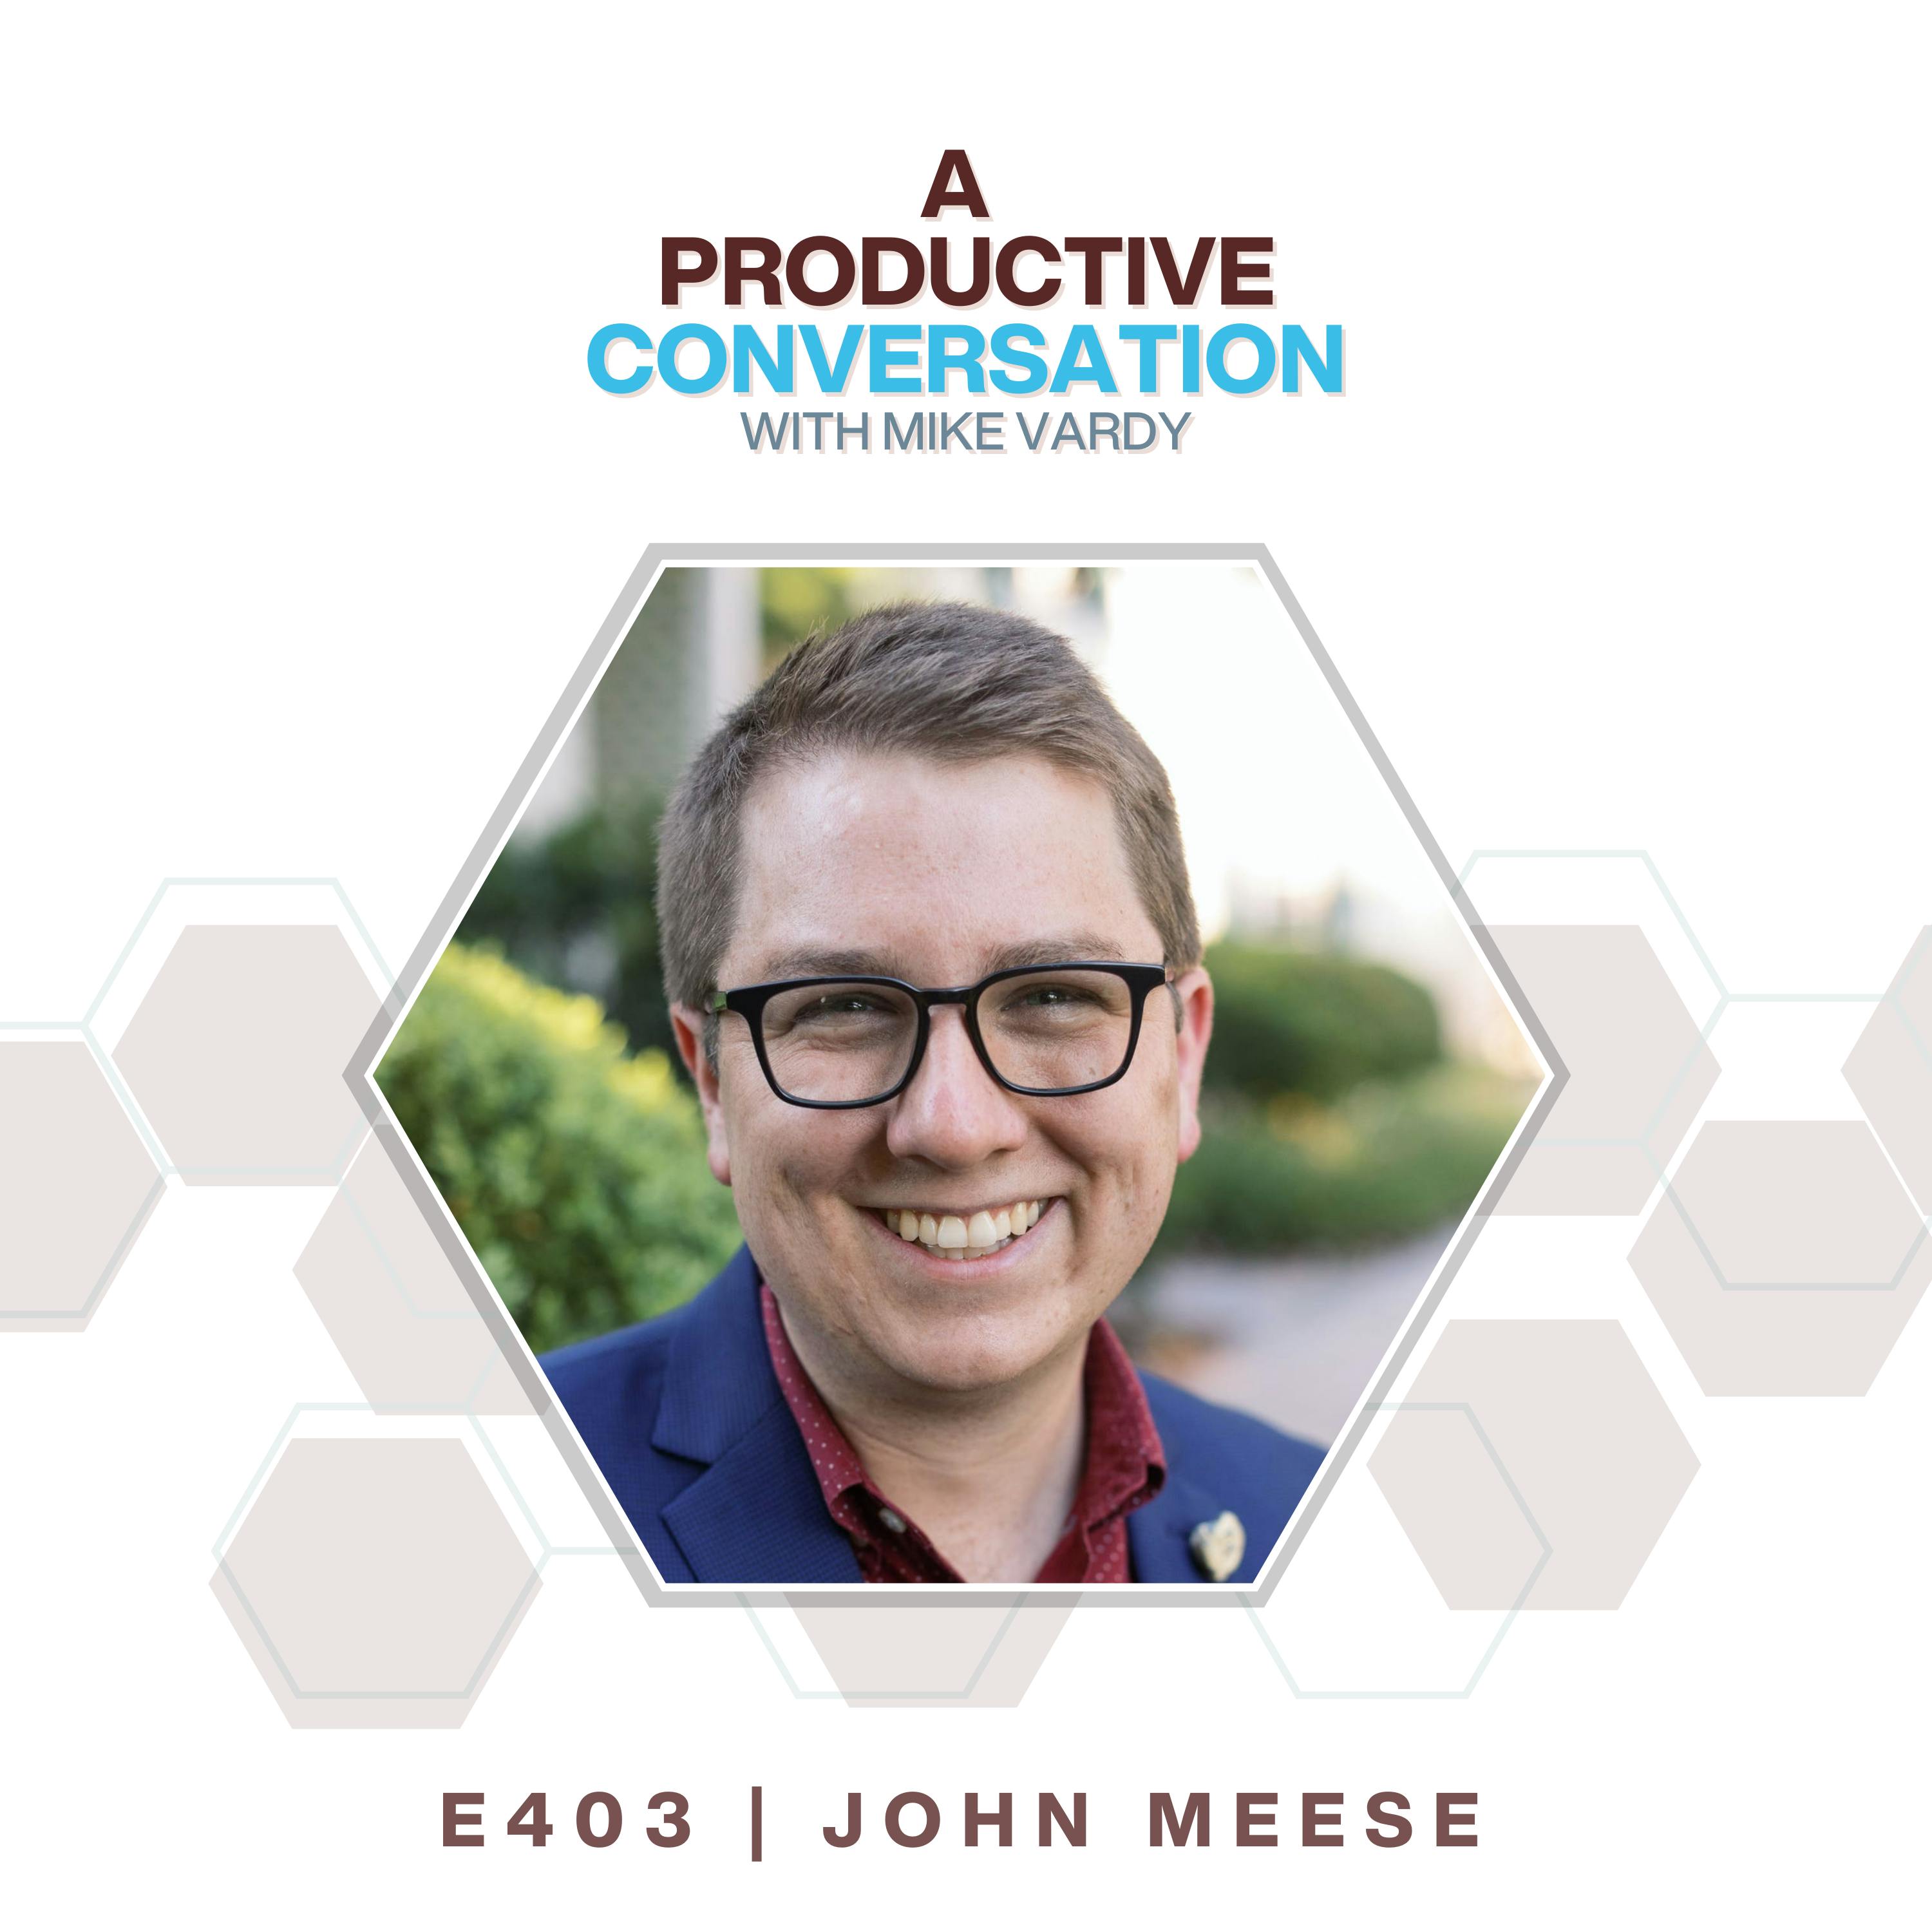 John Meese talks about Profit, Growth and Thriving